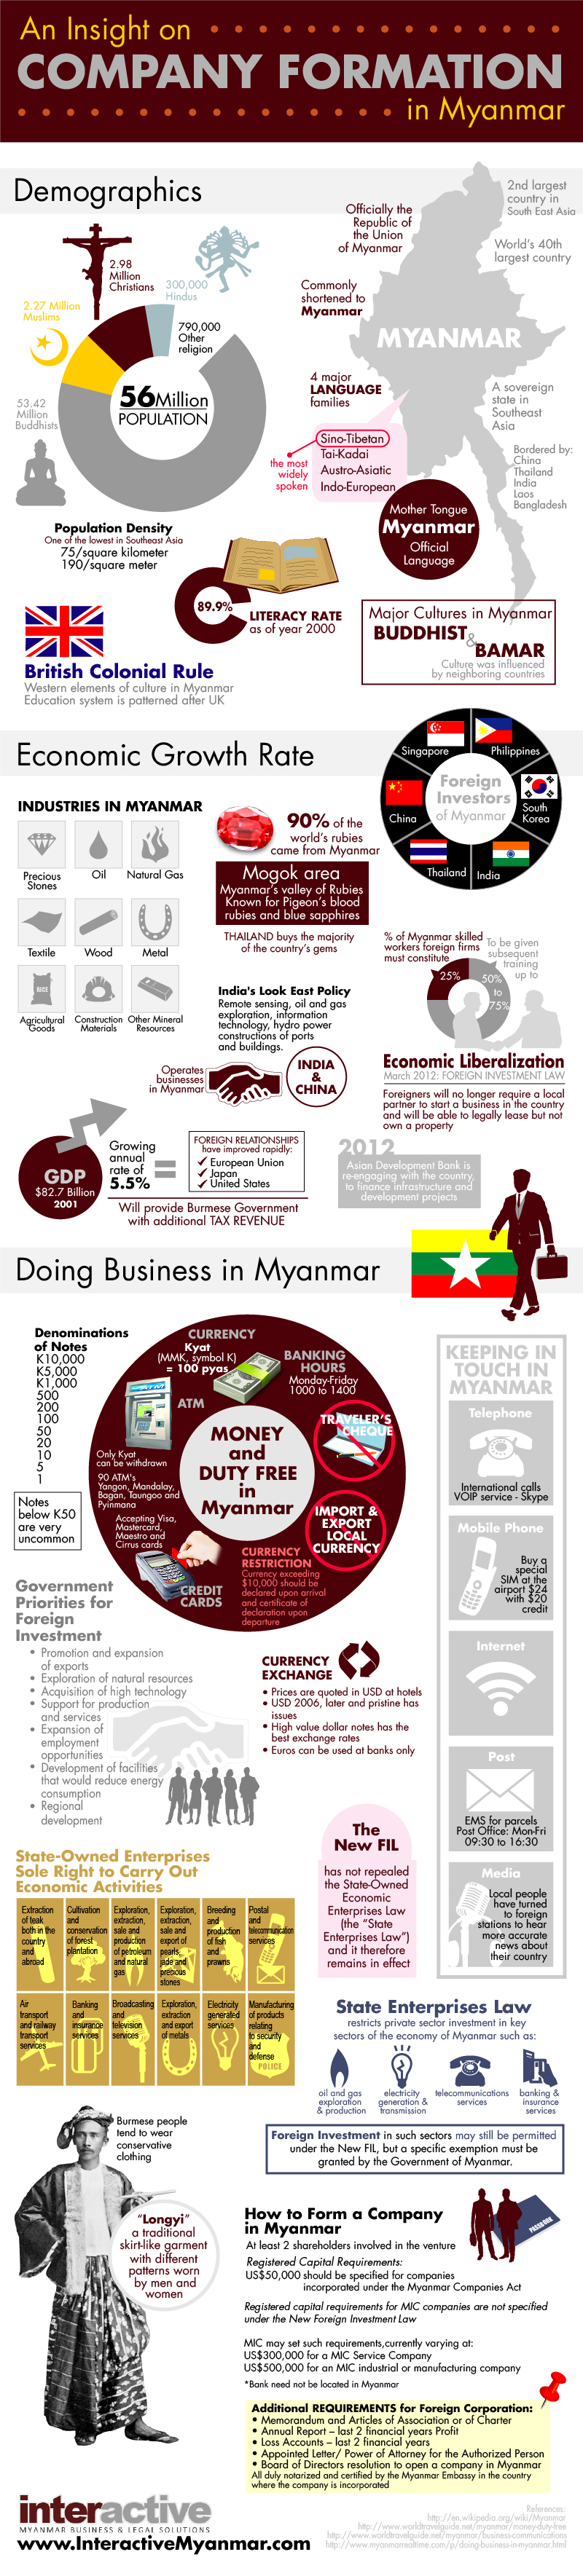 an-insight-on-company-formation-in-myanmar_525788dd63962